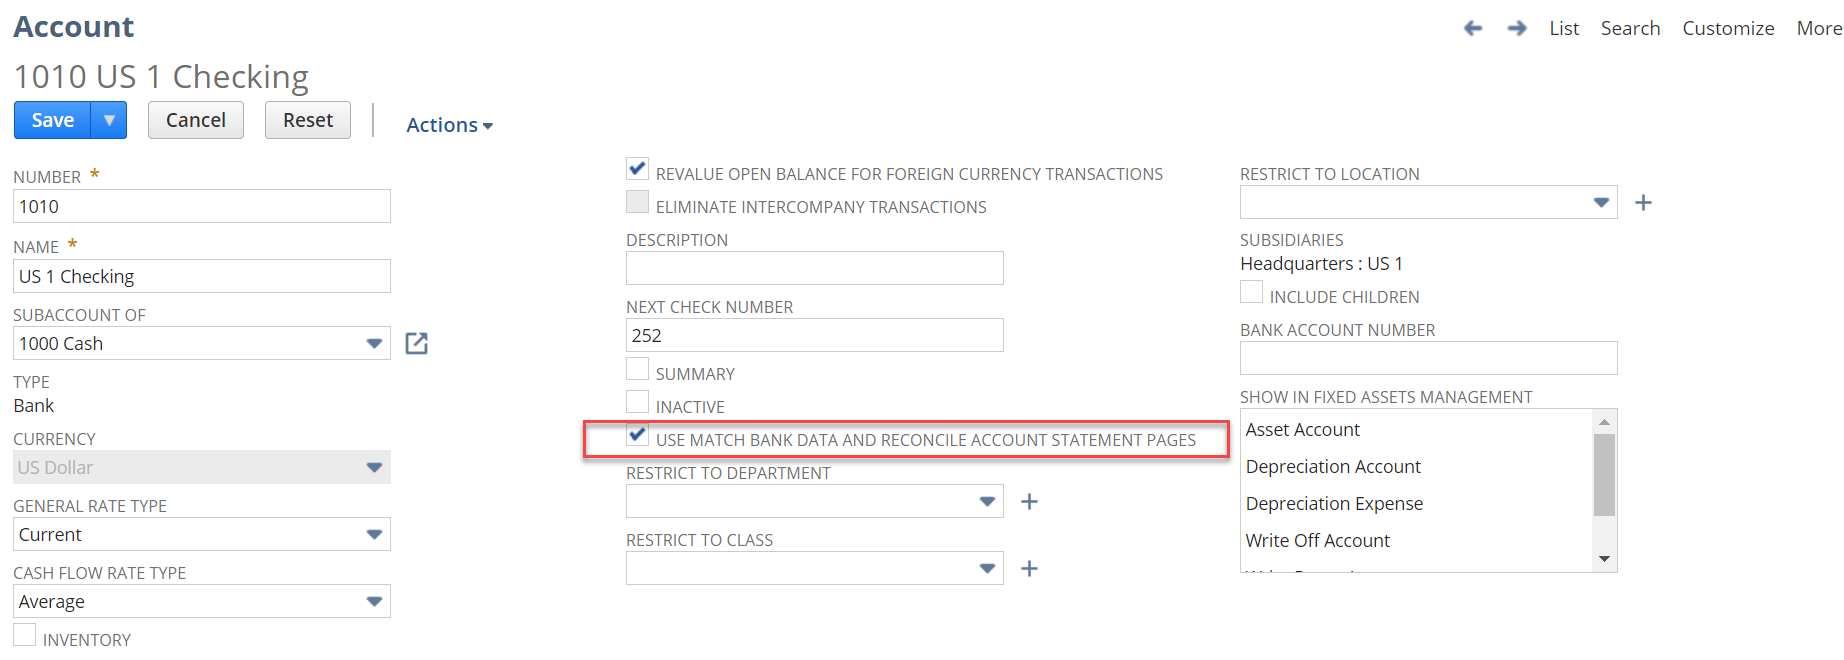 USE MATCH BANK DATA AND RECONCILE ACCOUNT STATEMENT PAGES